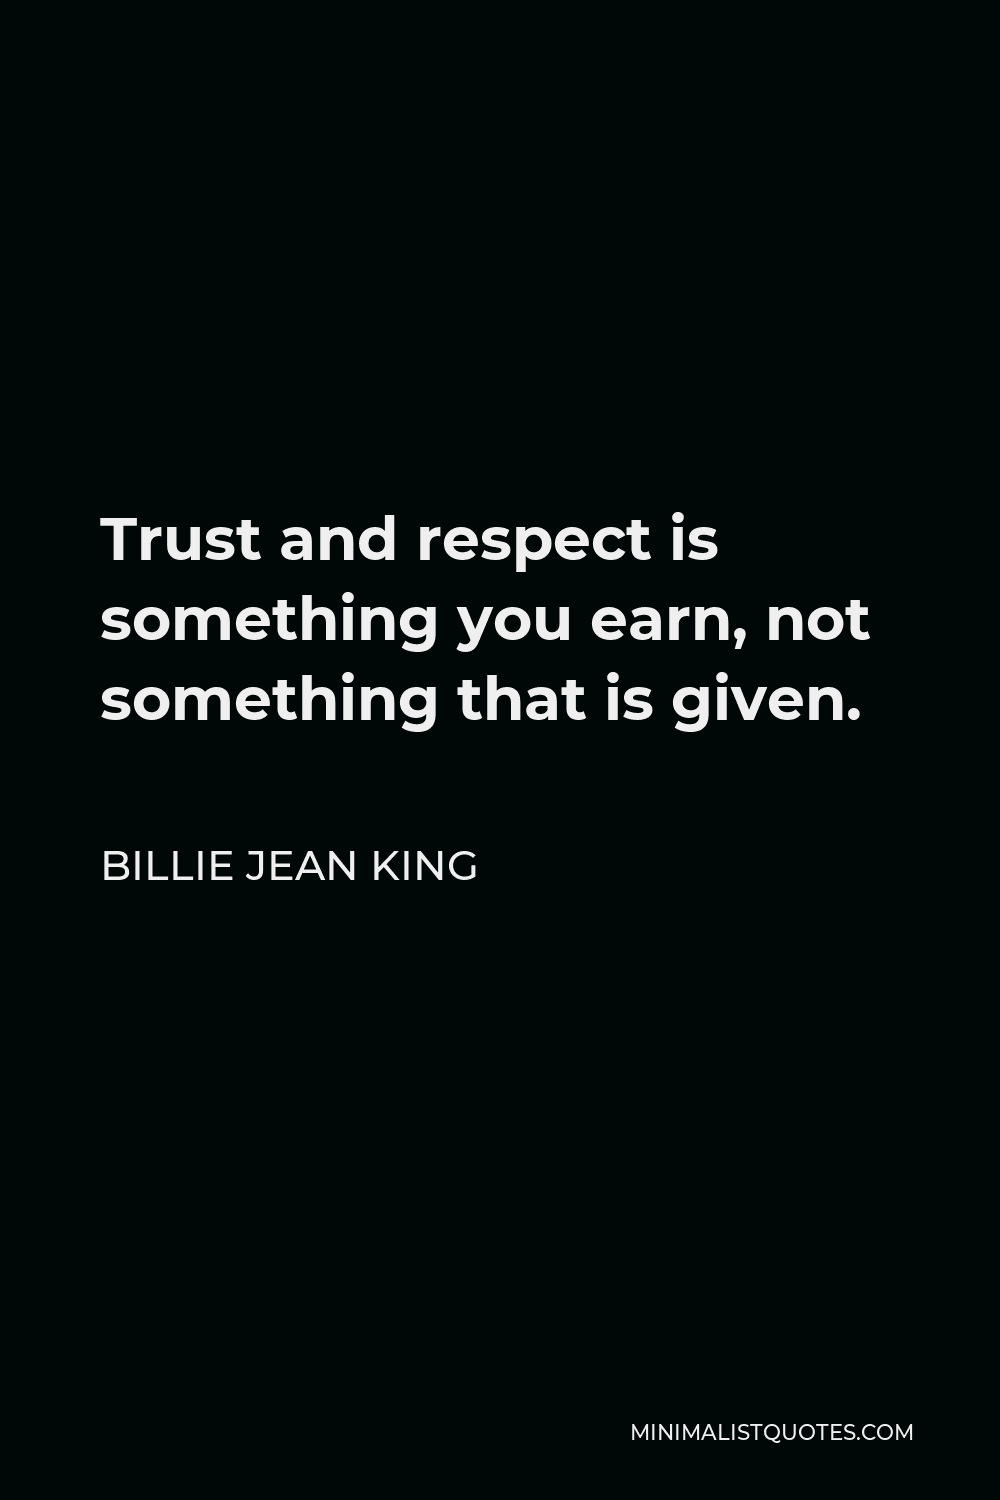 Billie Jean King Quote - Trust and respect is something you earn, not something that is given.